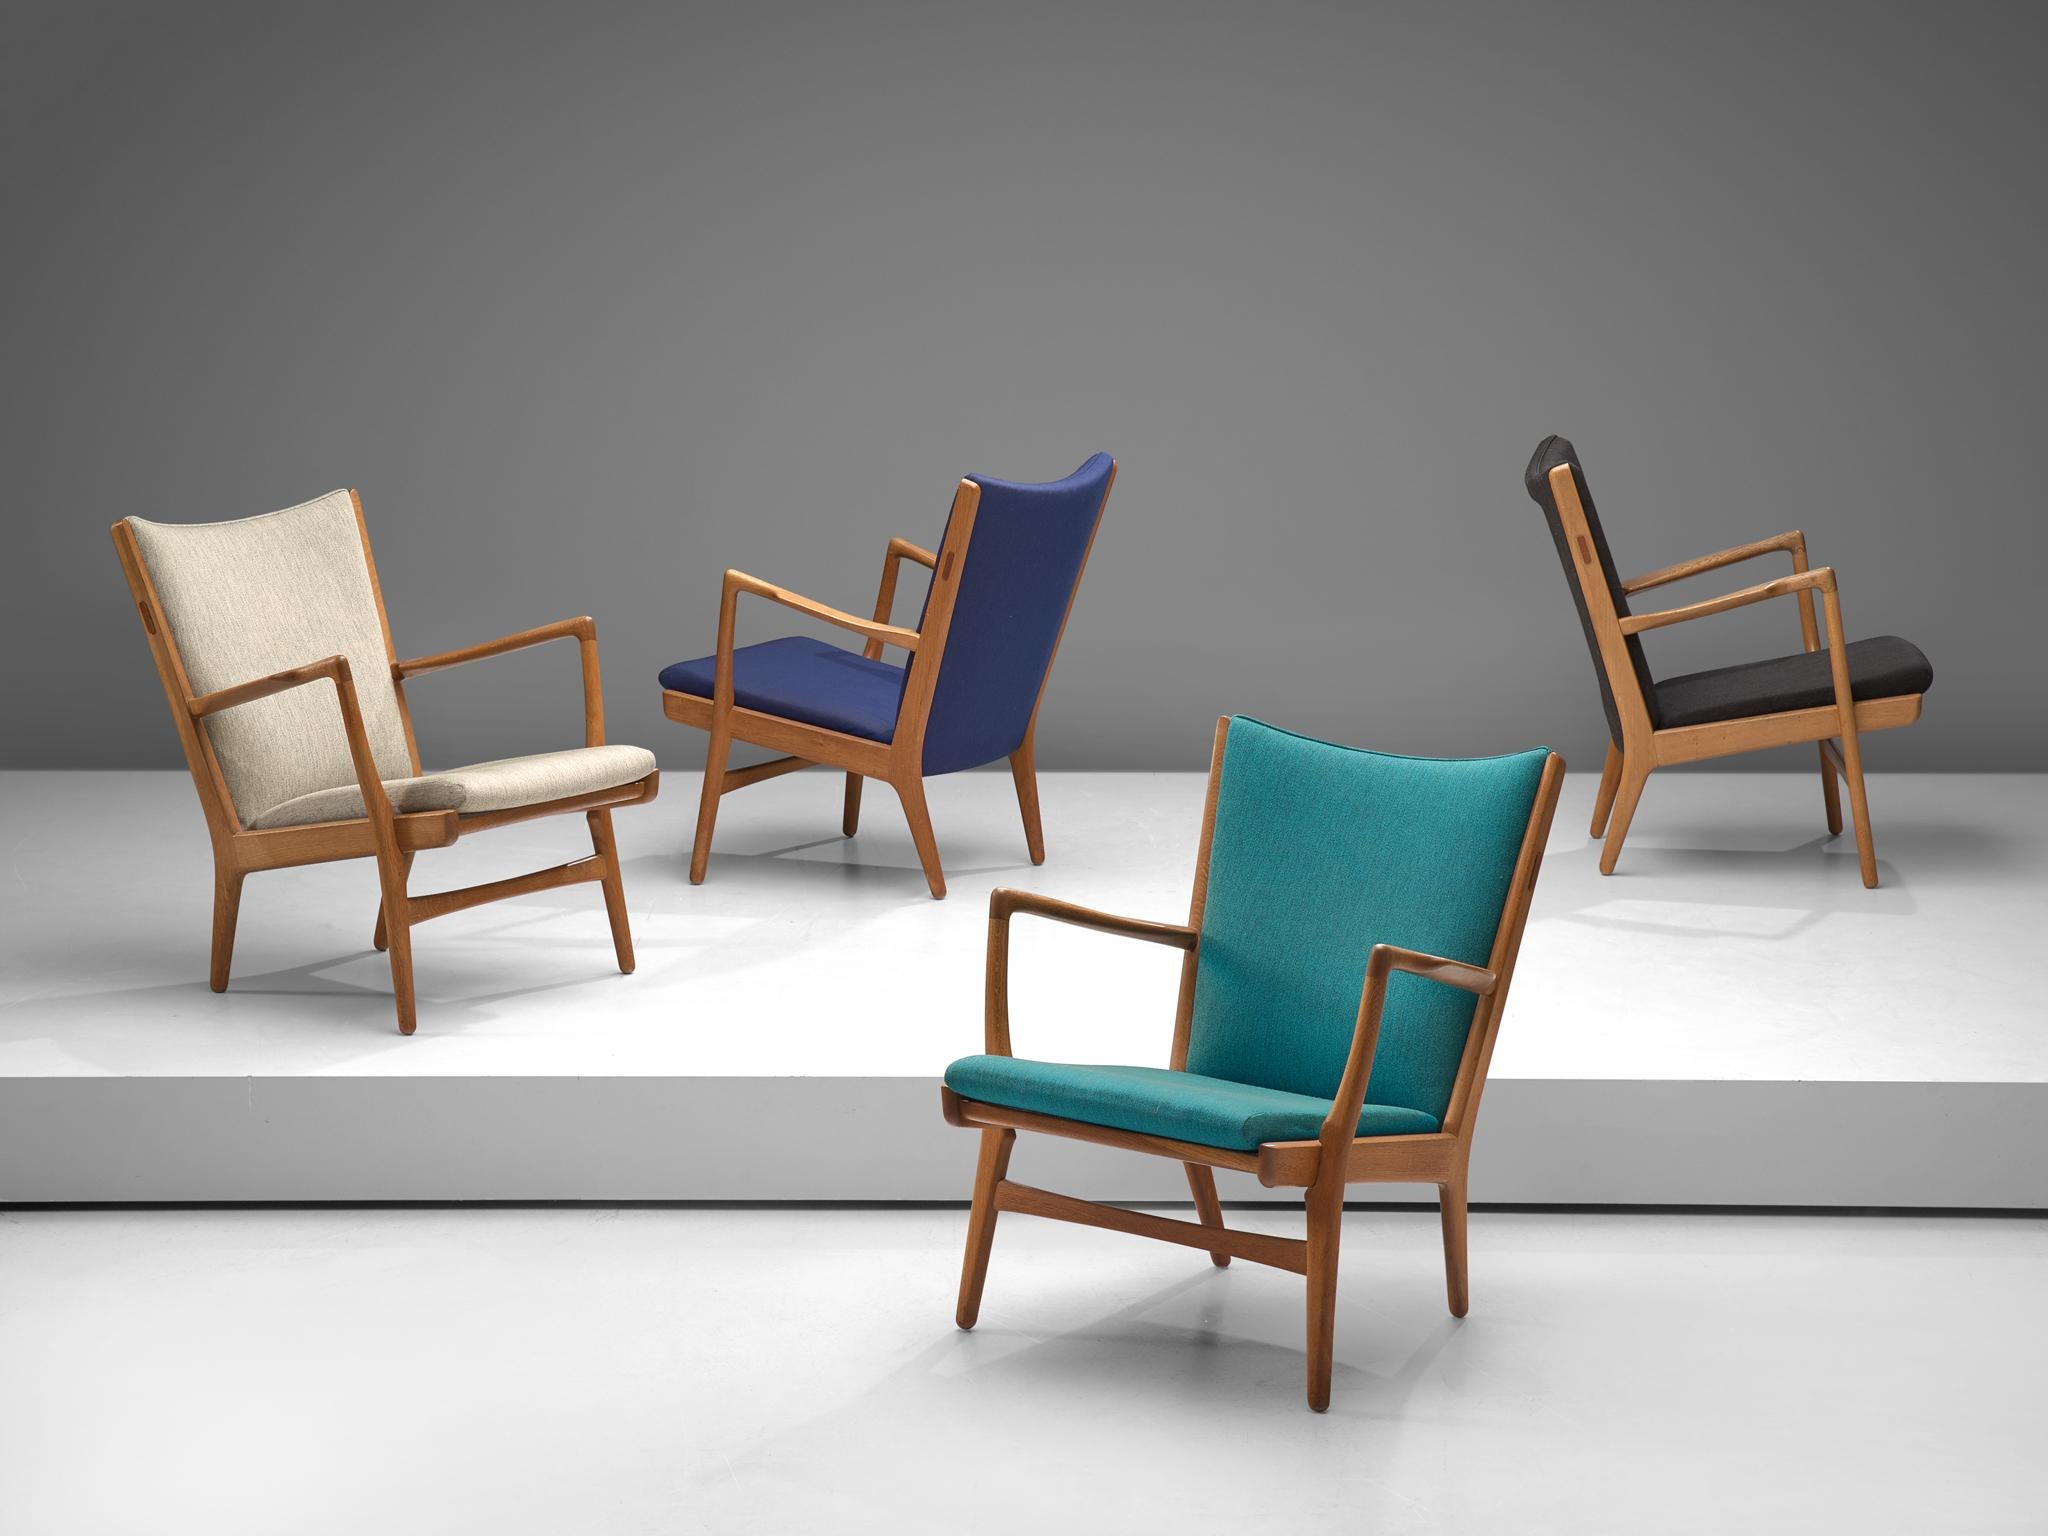 Hans J. Wegner for AP Stolen, 4 'AP-16' lounge chairs, fabric and oak, Denmark, 1951.

Set of four lounge chairs with oak frame designed by the Danish Hans J. Wegner. This model is produced by AP Stolen in small numbers and therefore not easy to